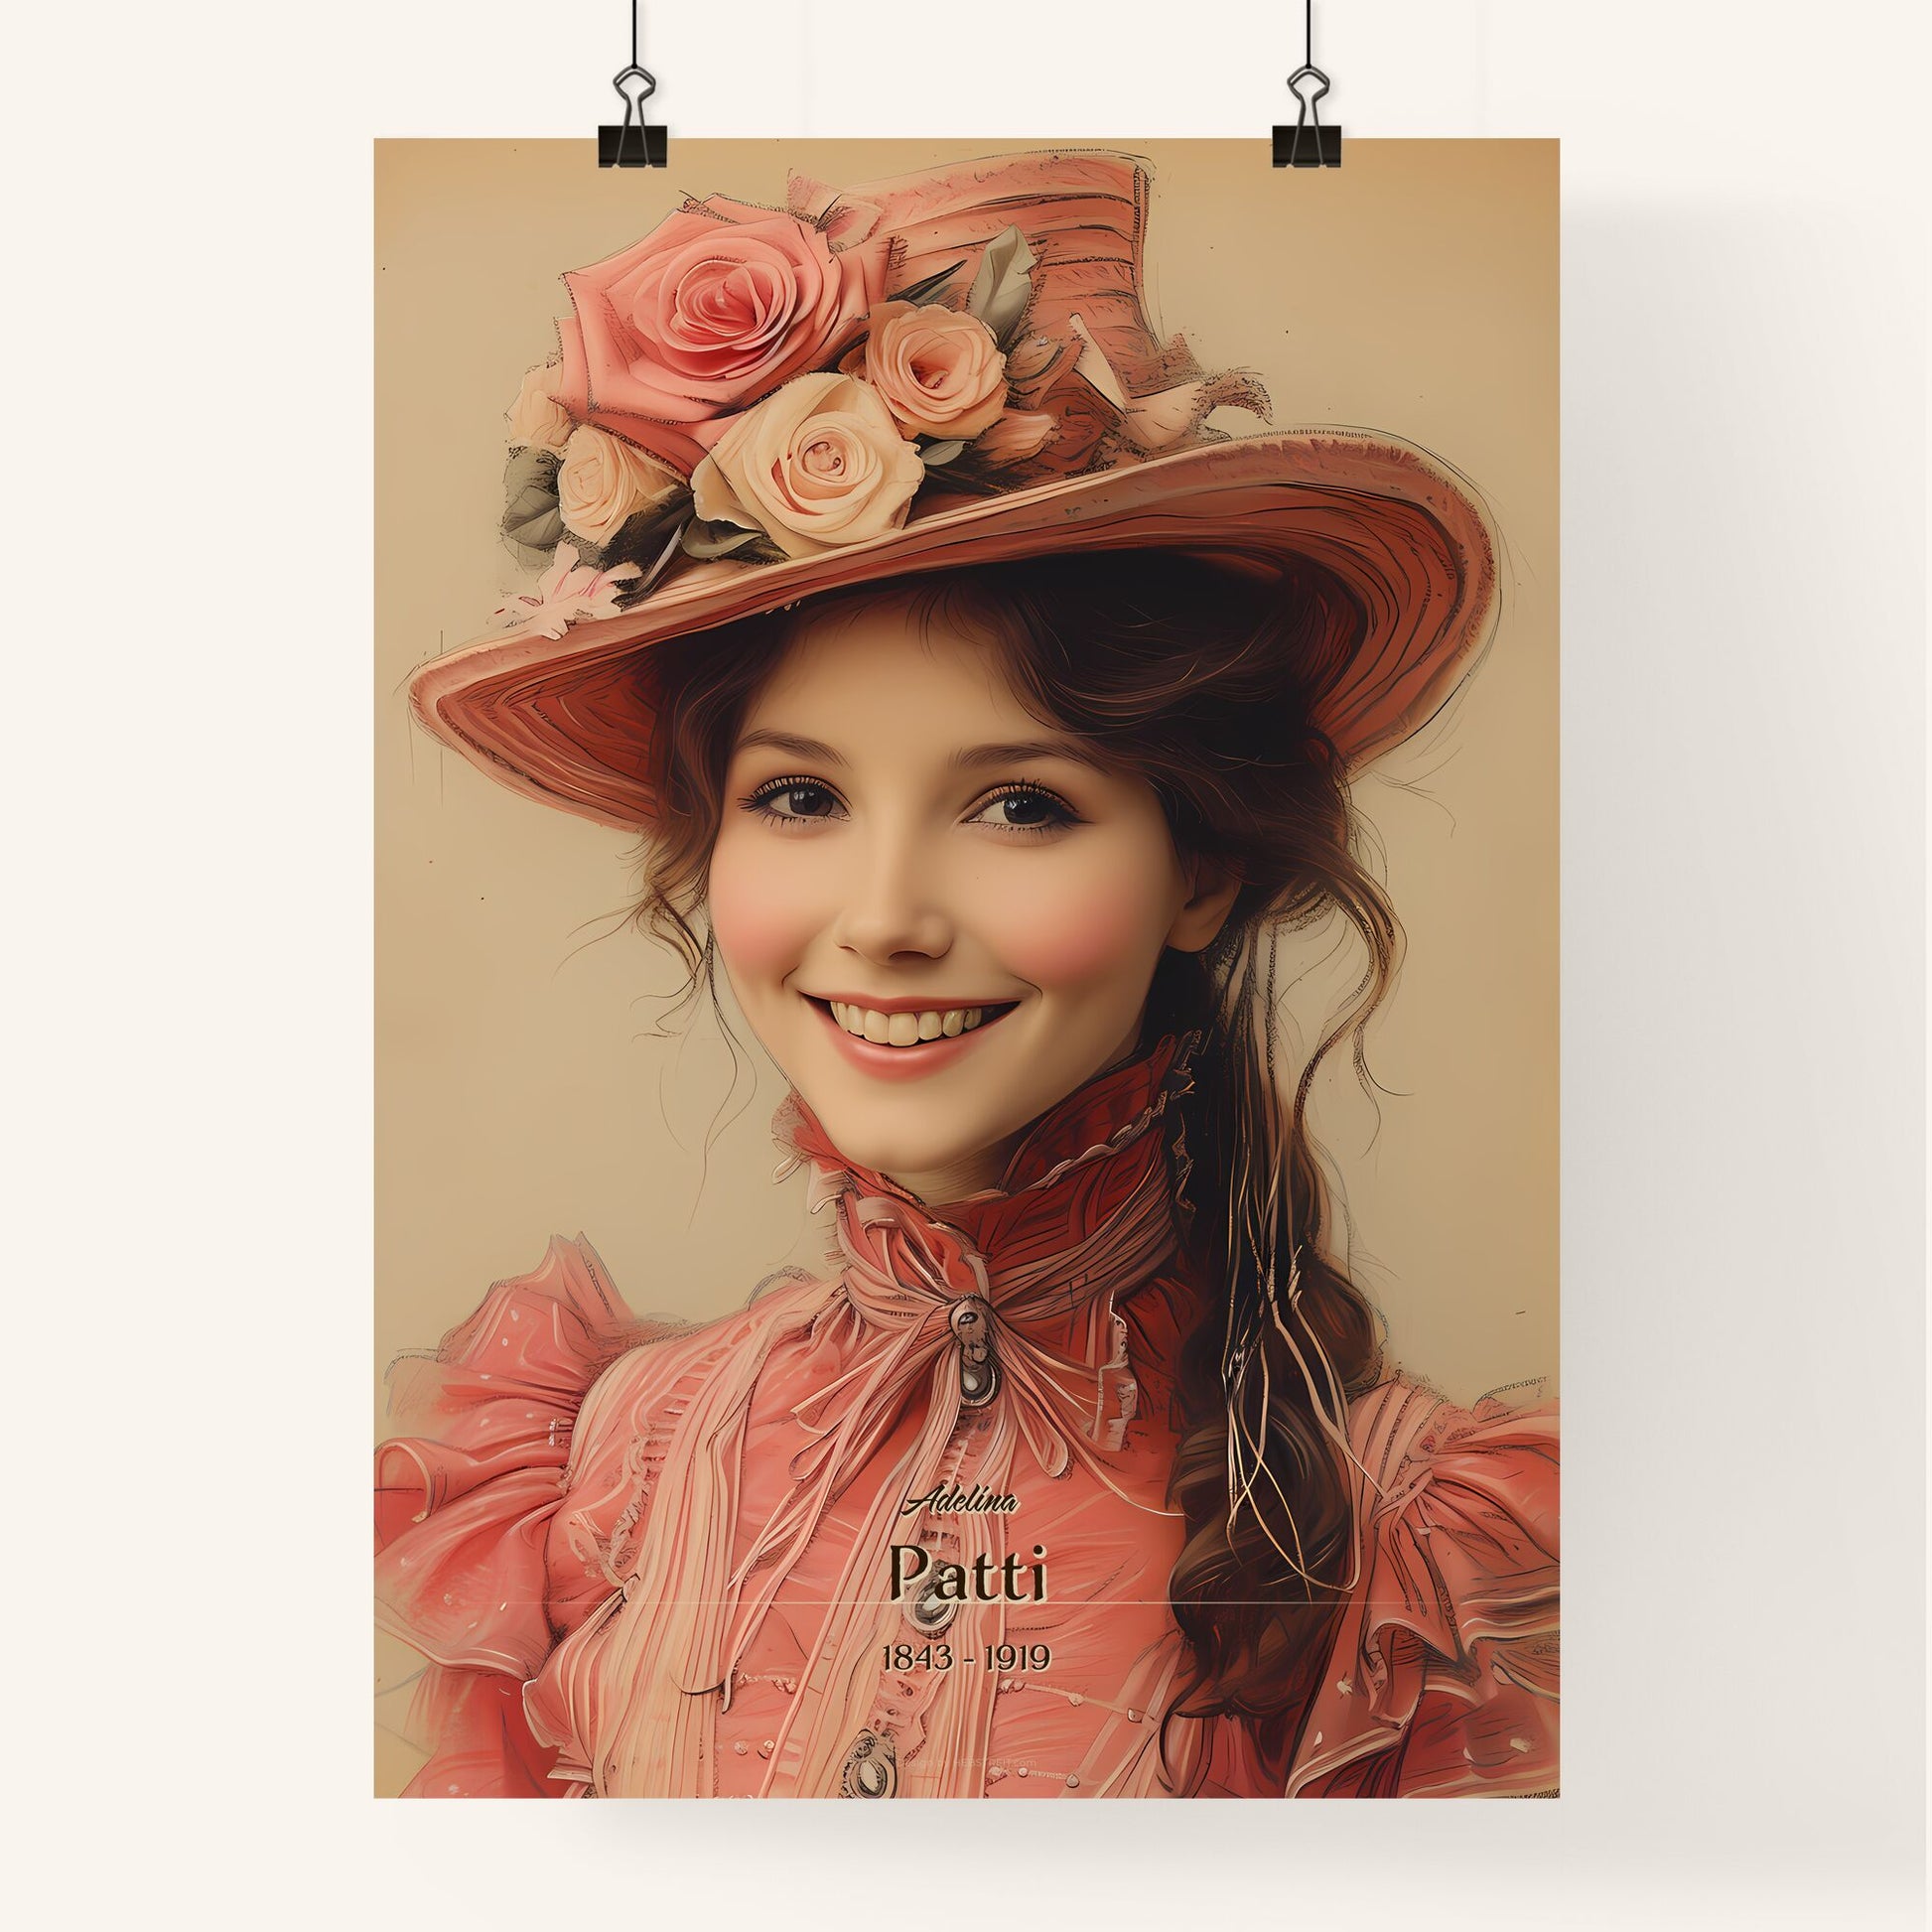 Adelina, Patti, 1843 - 1919, A Poster of a woman wearing a hat with flowers Default Title